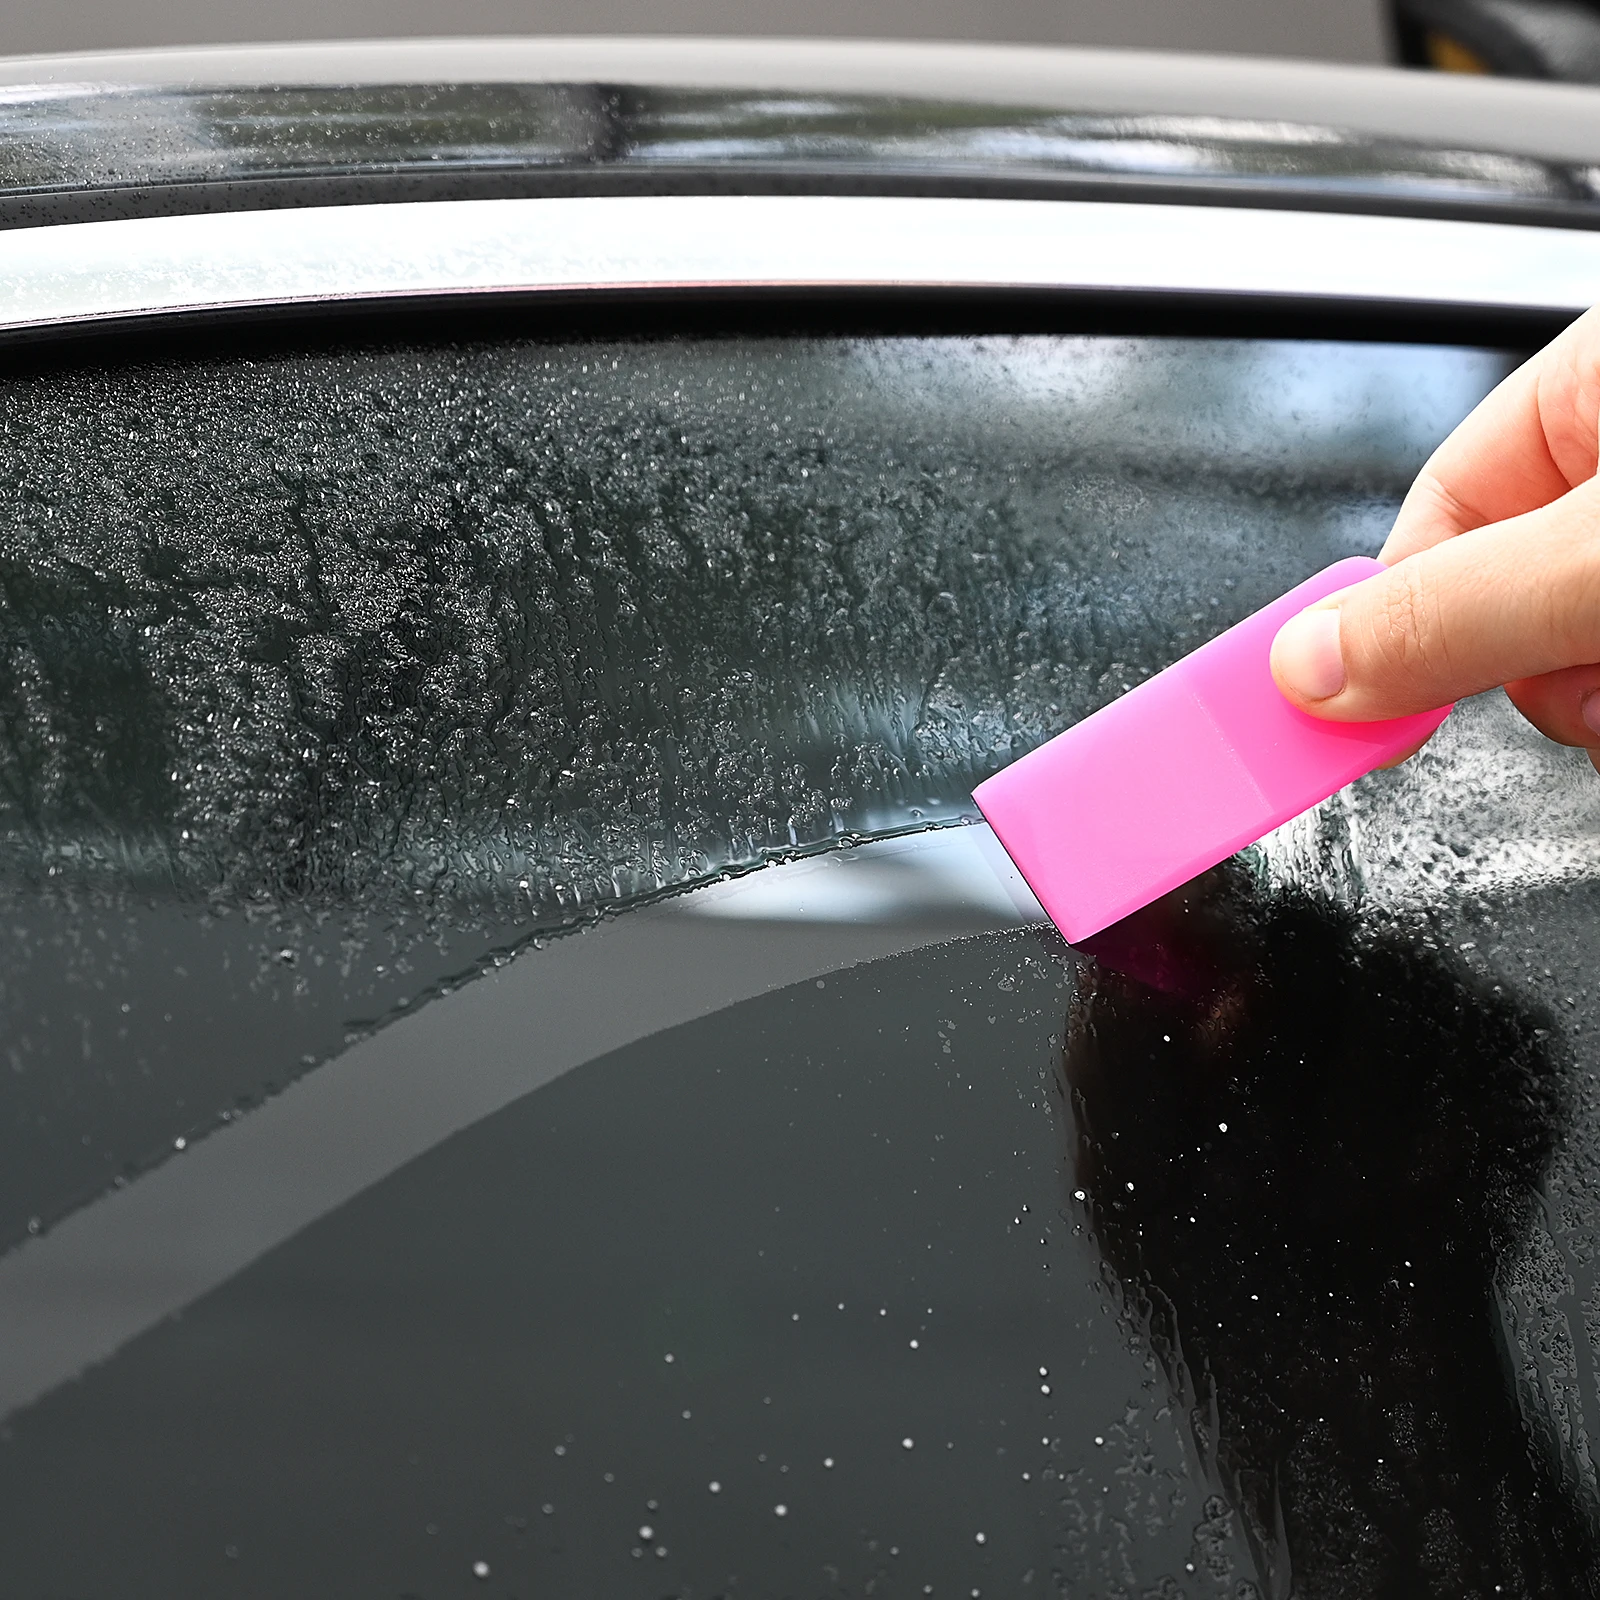 turtle wax ice EHDIS Pink Rubber Scraper Soft PPF Wrapping Car Tools Wash Accessories Vinyl Tint Window Film Glass Water Removal Card Squeegee best ways to clean car seats